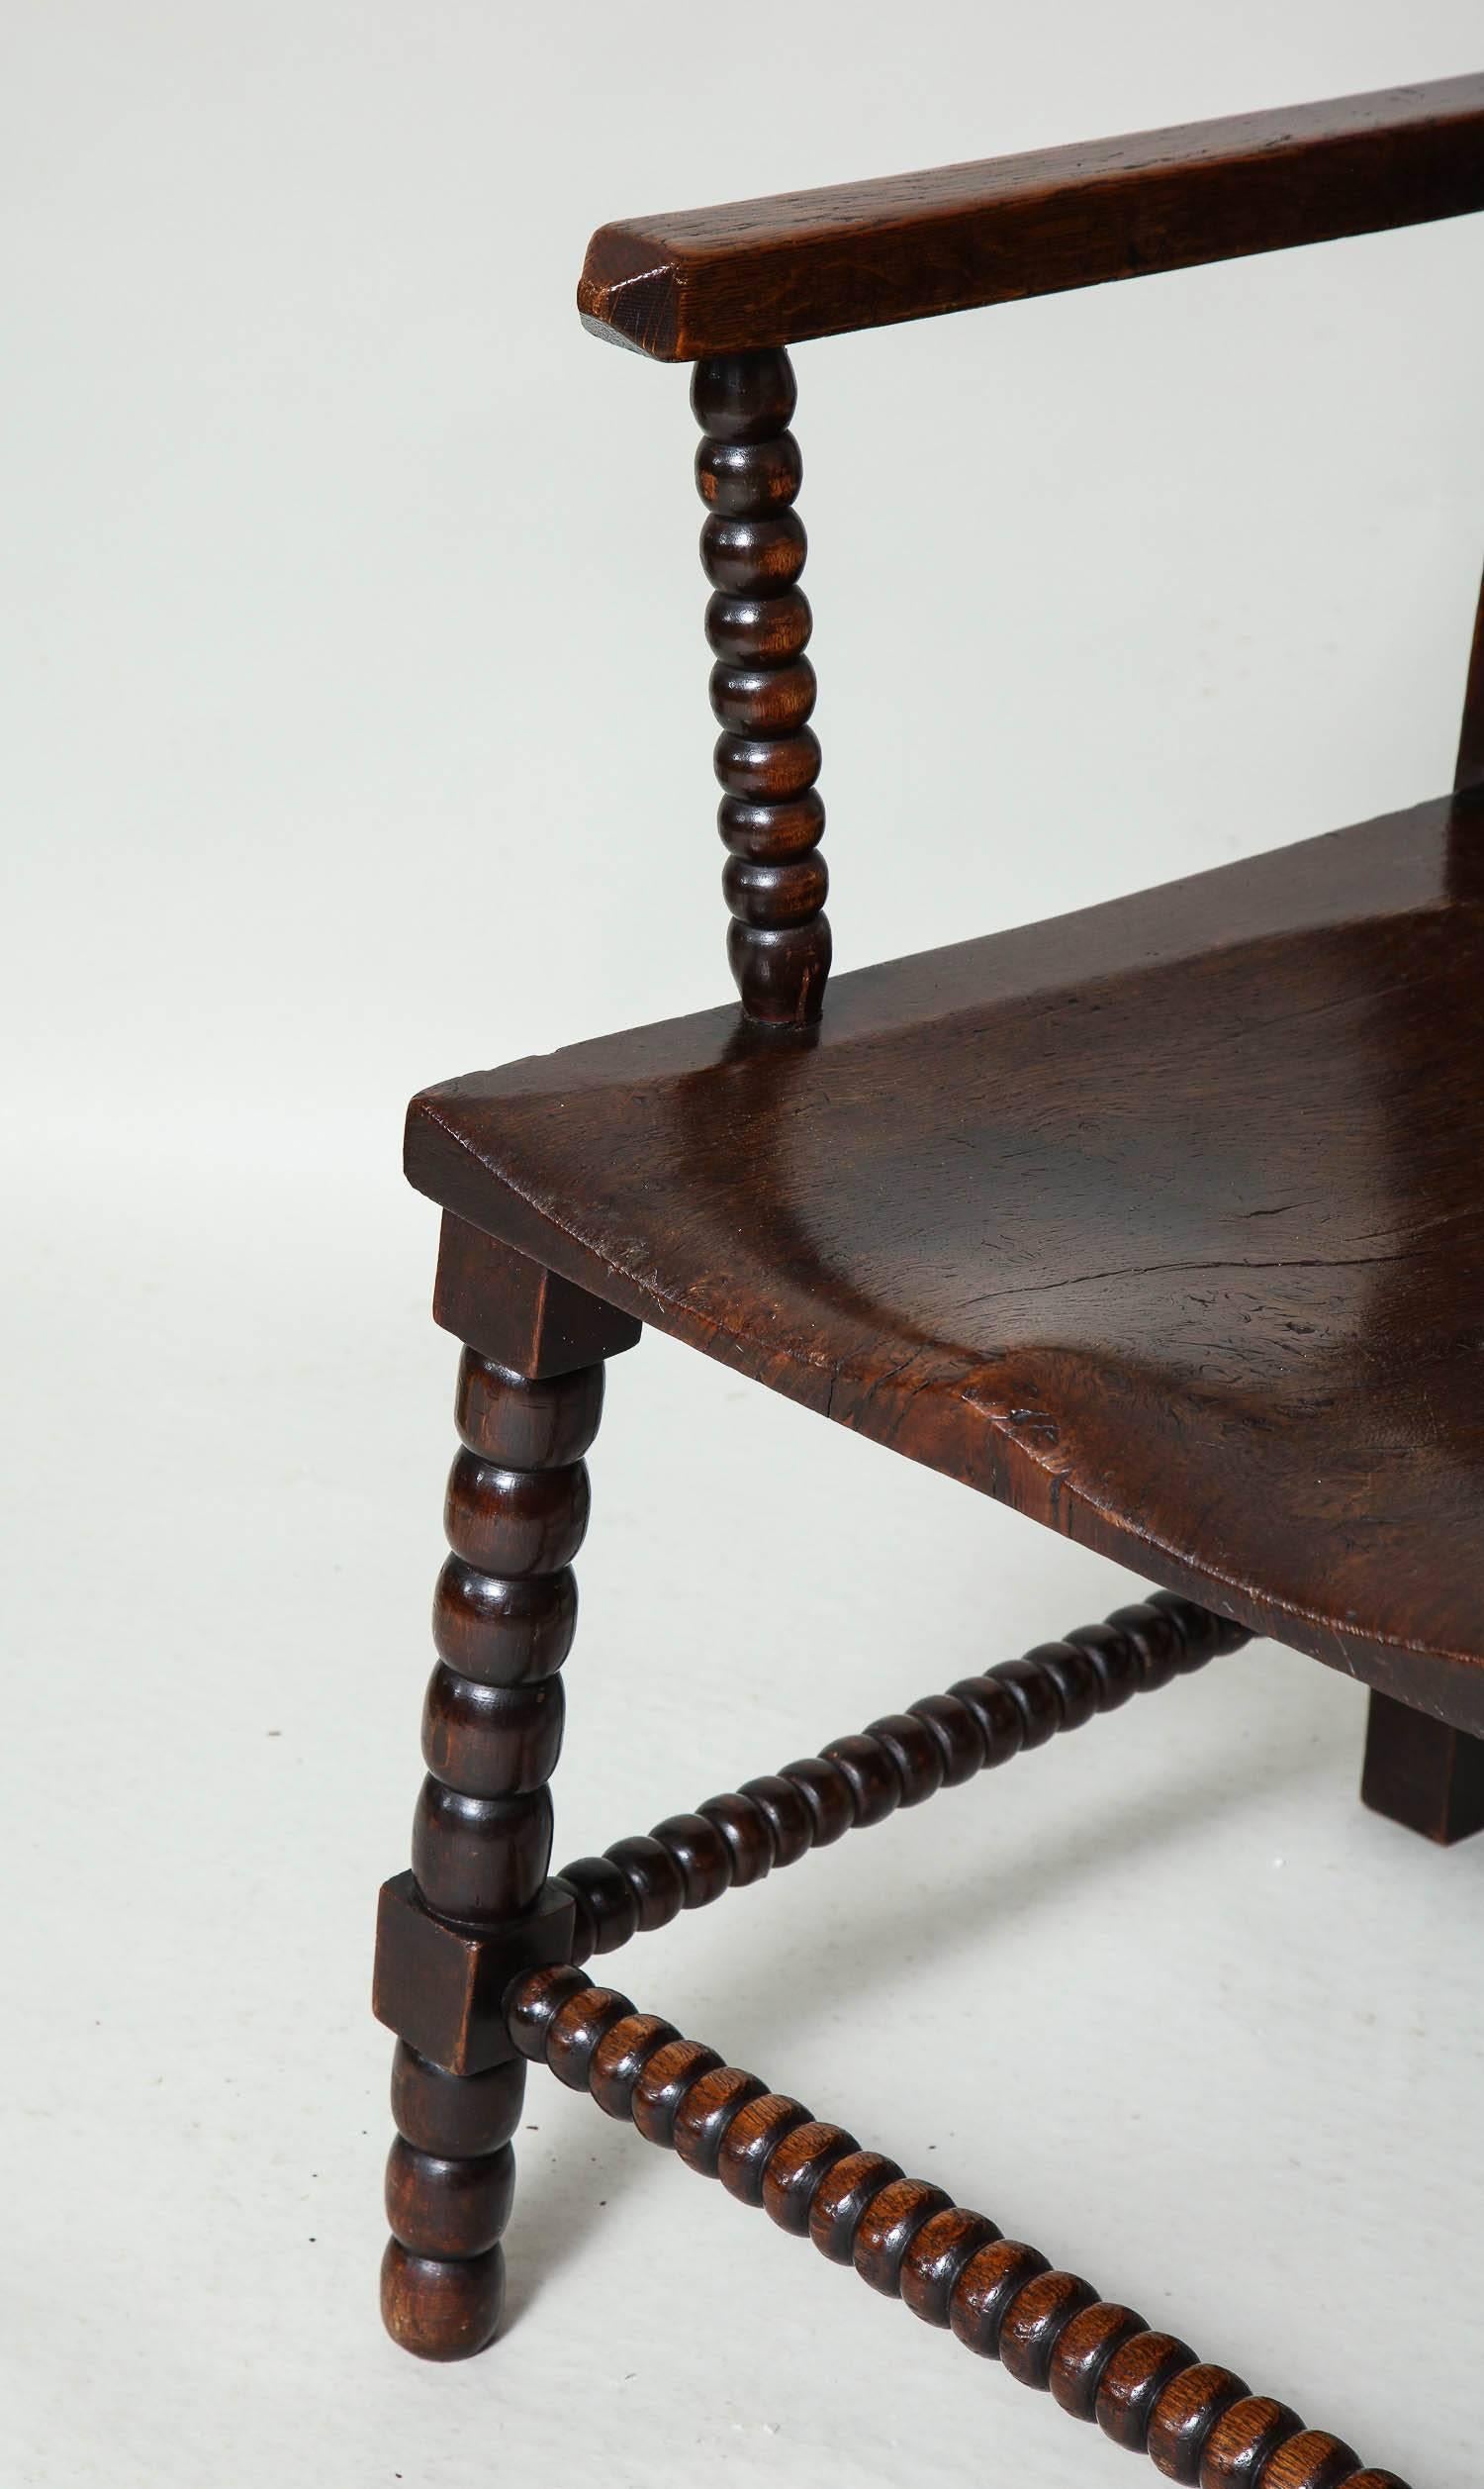 Fine English mid-19th century oar armchair with bobbin turnings, the rails with pyramid finials over open back with arched slats and bobbin spindles, the square arms with bobbin turned supports over shaped saddled seat having block and bobbin turned